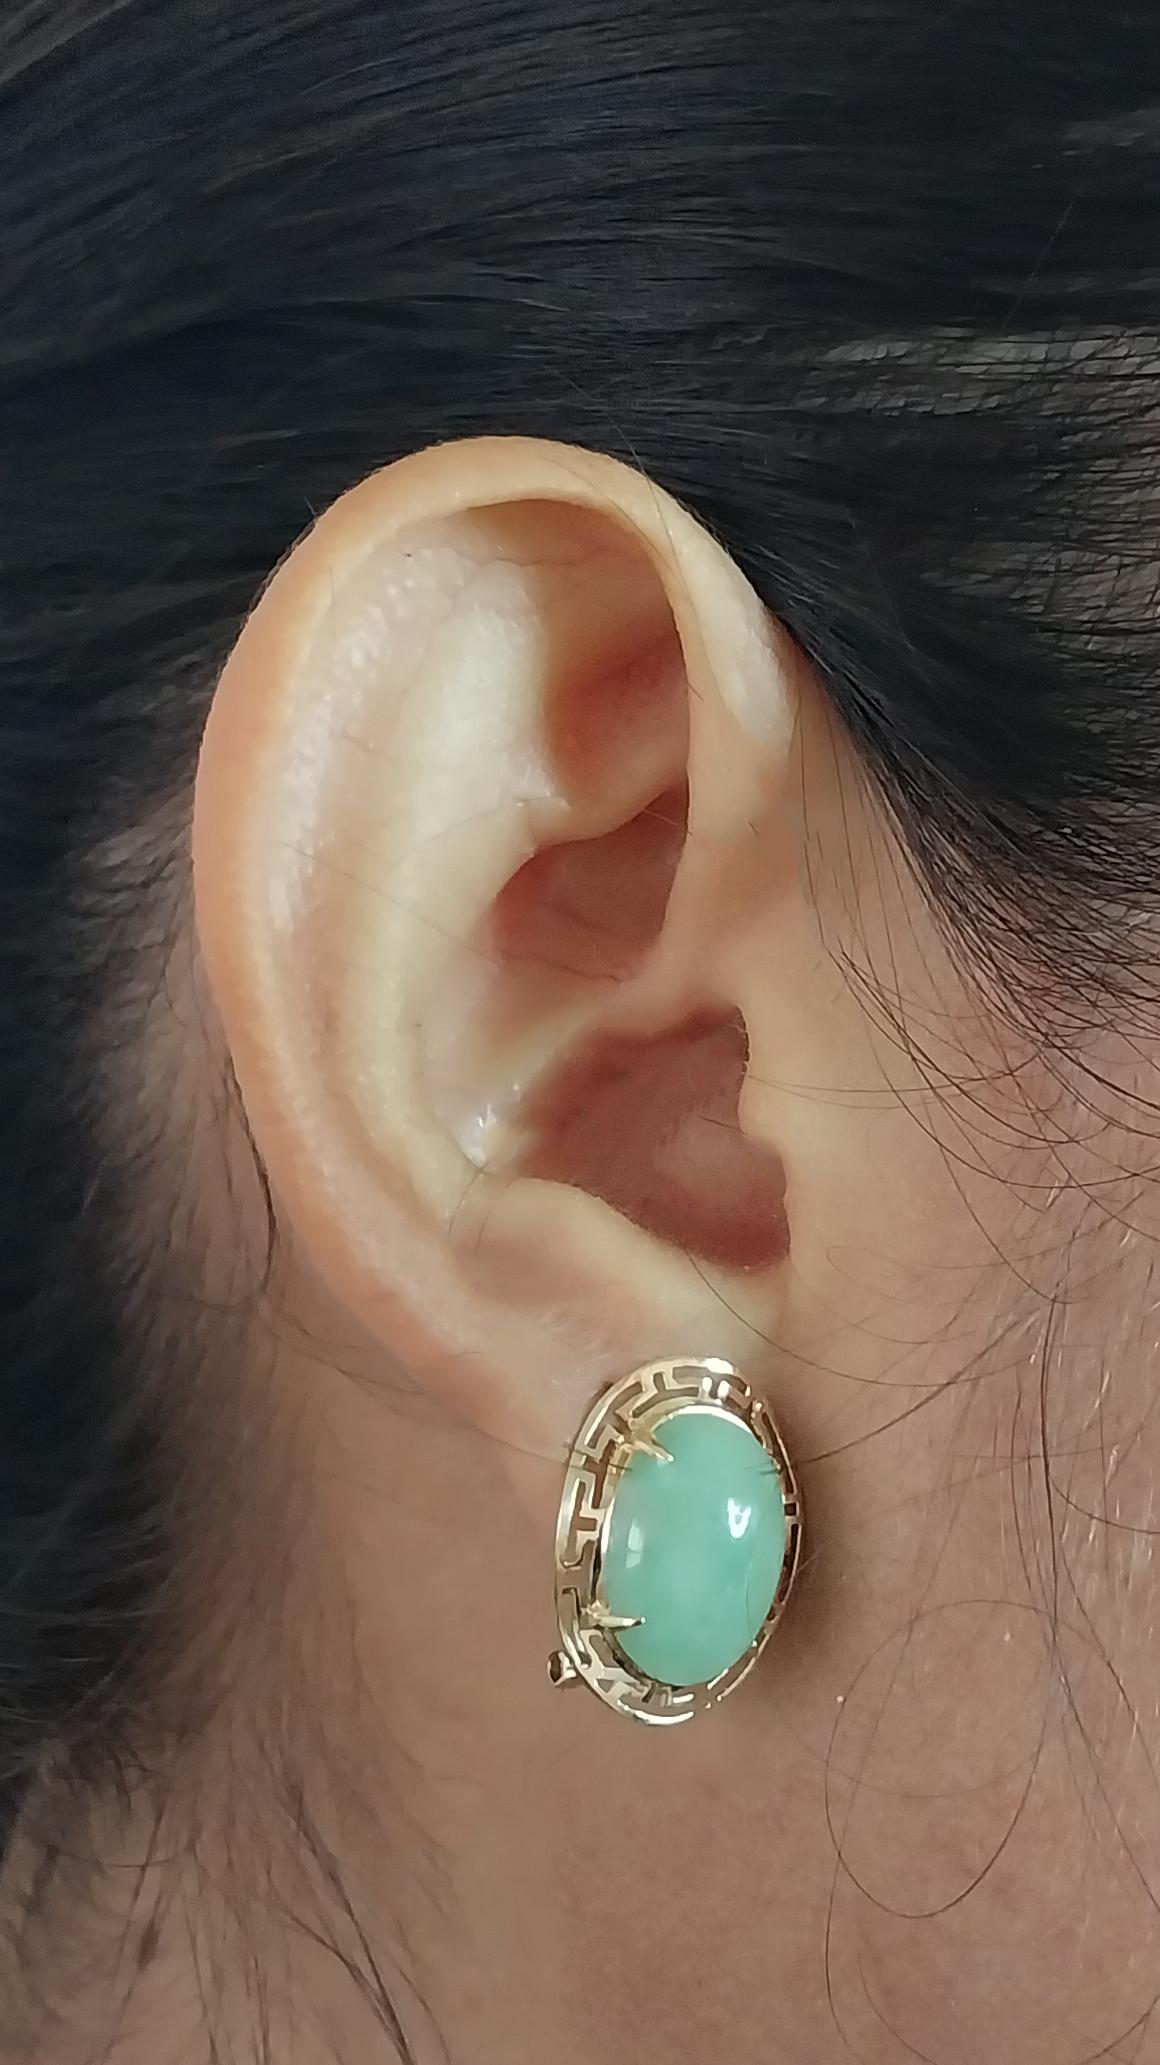 14 Karat Yellow Gold Earrings Featuring Two 14mm x 10mm Oval Cabochon Jade Surrounded with a Gold Border. 0.75 Inches Long. Pierced Post with Omega Clip Back. Finished Weight is 4.2 Grams.